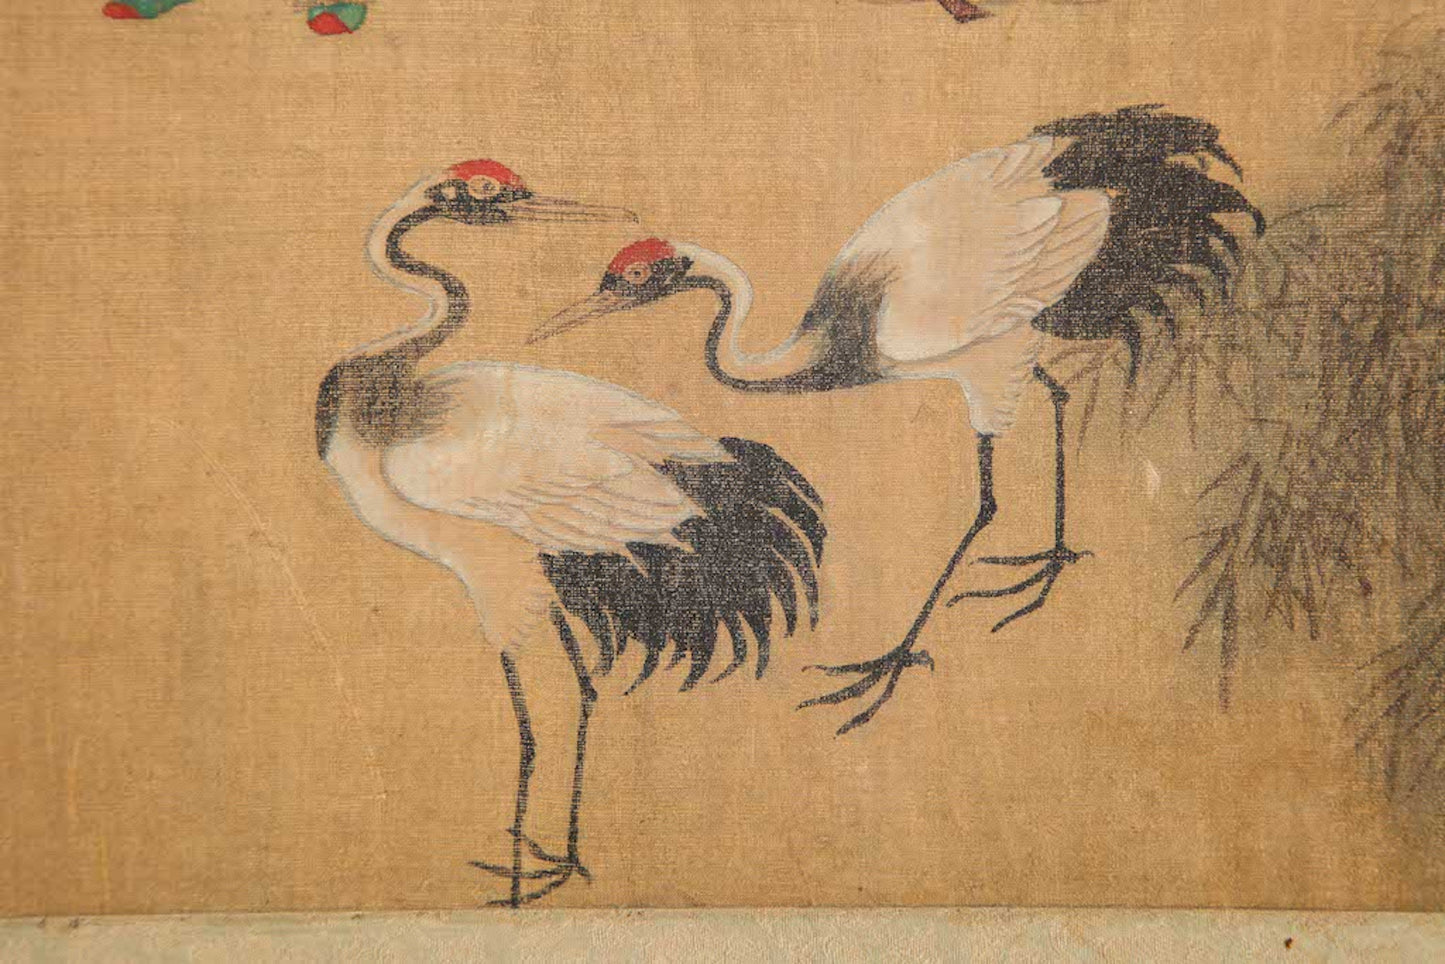 Chinese Court Painting on Silk